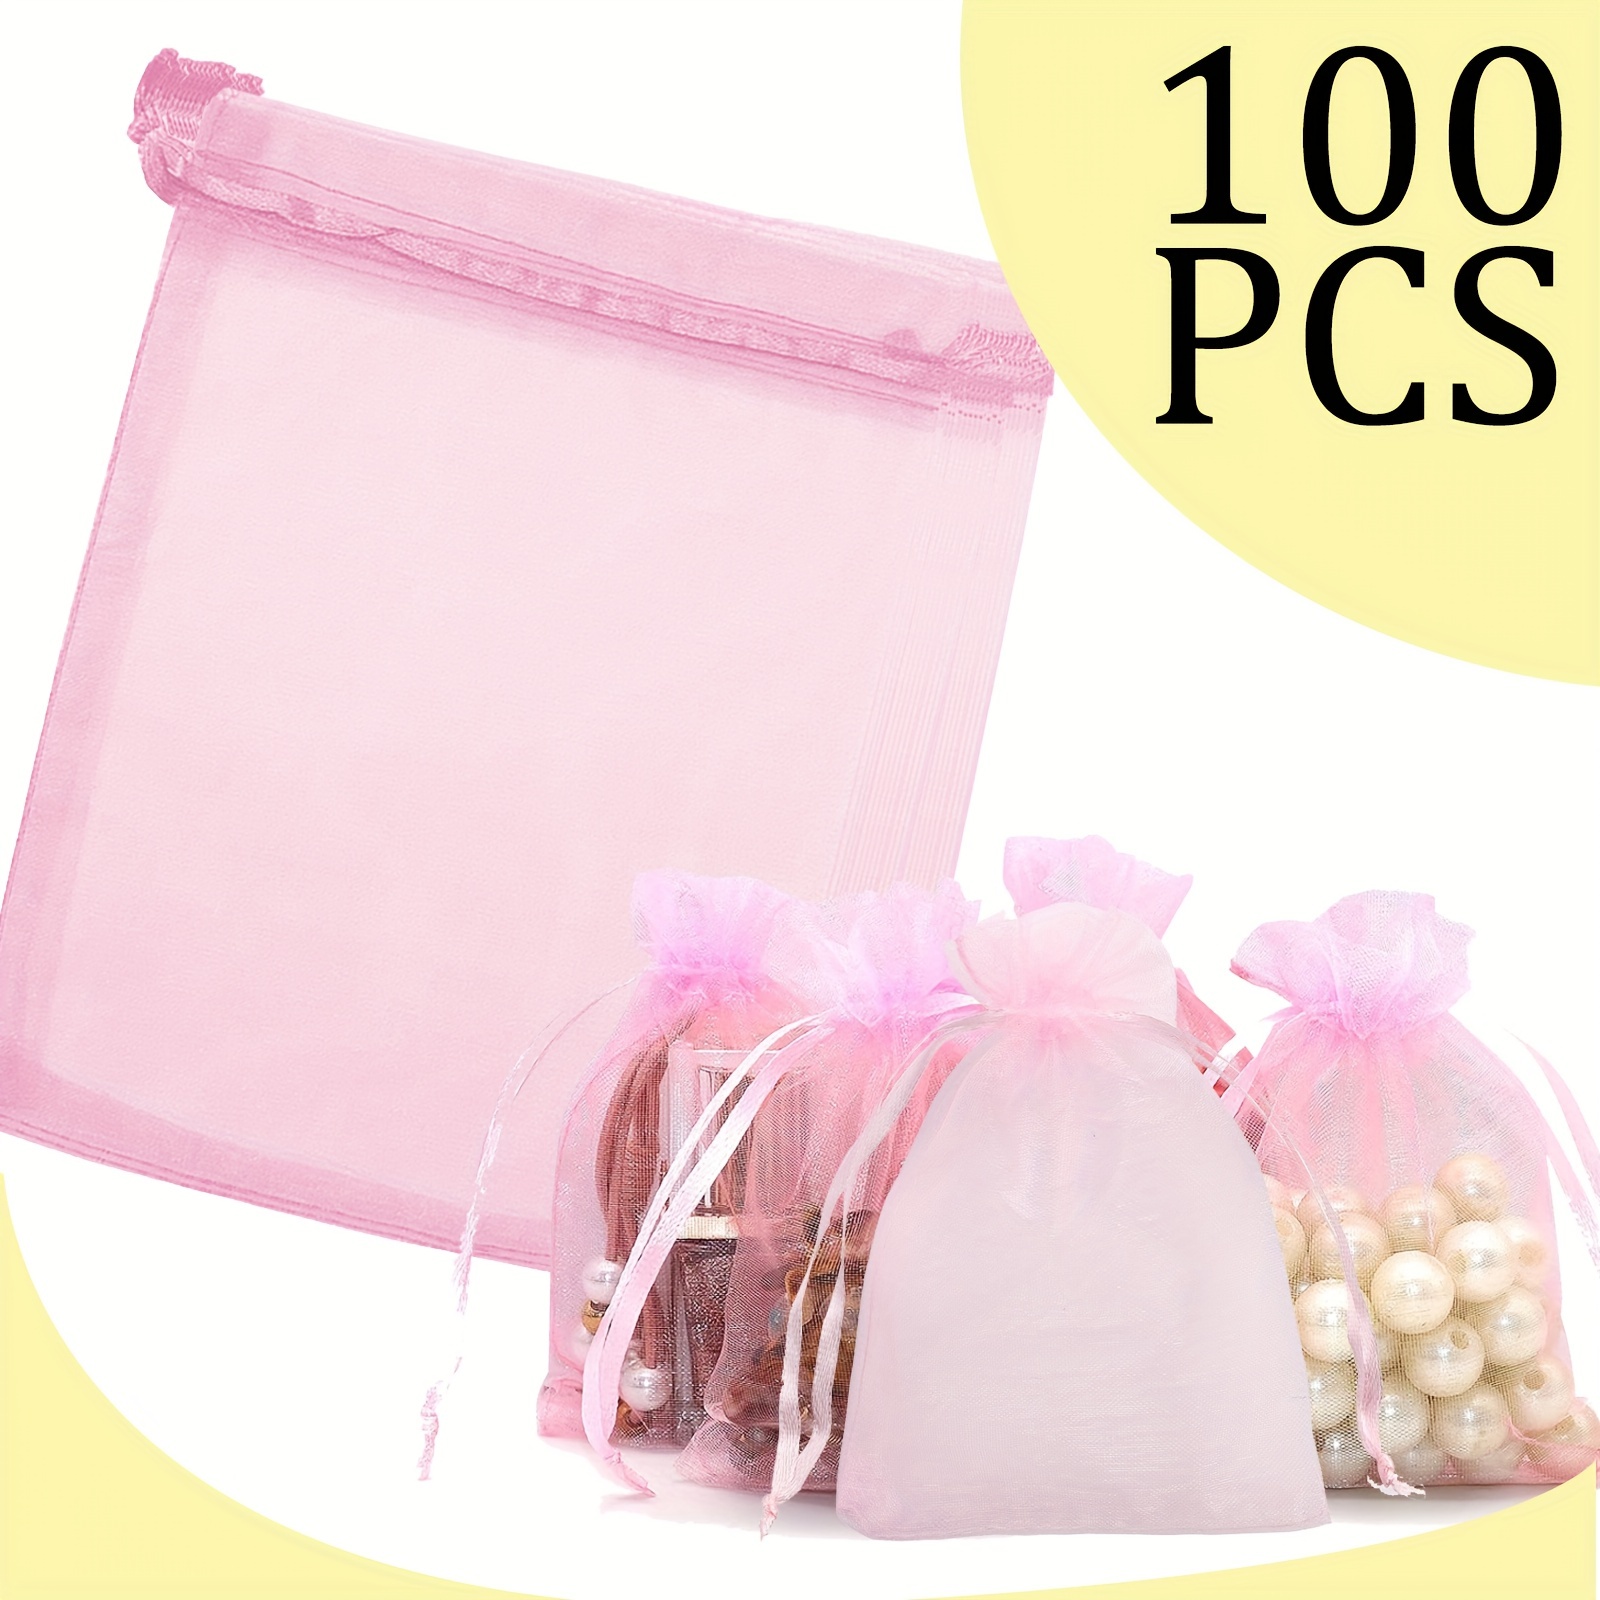 100 Pieces Thank You Bags Sheer For Small Jewelry Present with Drawstring,  4 x 6 Mesh Wedding Party Favor Bags for Sachet, Candy, Soap, Makeup Organza